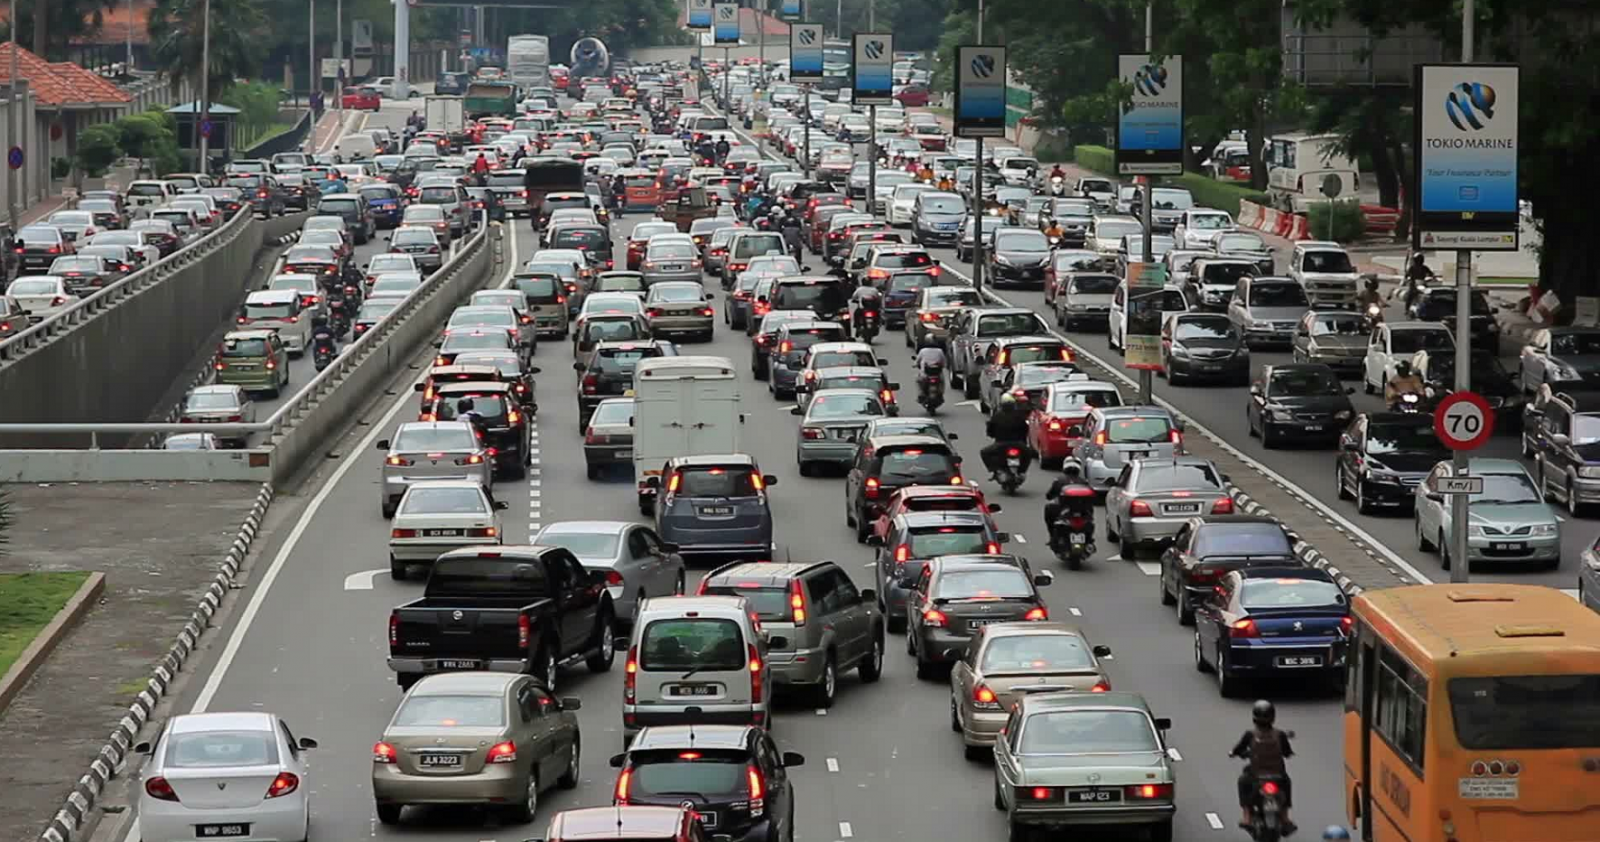 Extra Congestion In Cameron Highlands Is Expected During Cny, M'Sians Are Advised To Obey Road Rules - World Of Buzz